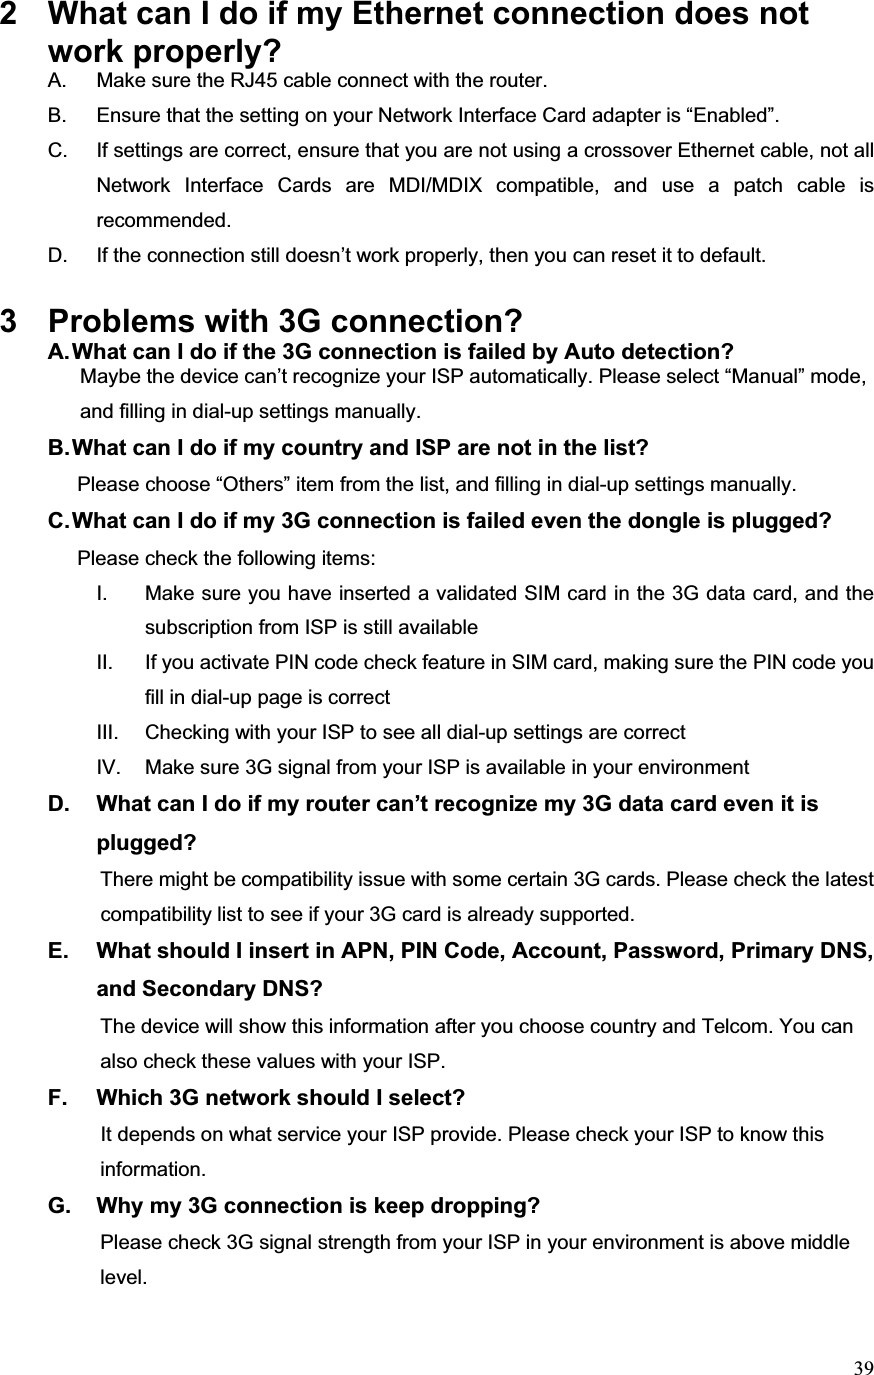 392  What can I do if my Ethernet connection does not work properly? A.  Make sure the RJ45 cable connect with the router. B.  Ensure that the setting on your Network Interface Card adapter is “Enabled”. C.  If settings are correct, ensure that you are not using a crossover Ethernet cable, not all Network Interface Cards are MDI/MDIX compatible, and use a patch cable is recommended. D.  If the connection still doesn’t work properly, then you can reset it to default.     3  Problems with 3G connection? A. What can I do if the 3G connection is failed by Auto detection?           Maybe the device can’t recognize your ISP automatically. Please select “Manual” mode,                       and filling in dial-up settings manually. B. What can I do if my country and ISP are not in the list?        Please choose “Others” item from the list, and filling in dial-up settings manually.C. What can I do if my 3G connection is failed even the dongle is plugged?        Please check the following items: I.  Make sure you have inserted a validated SIM card in the 3G data card, and the subscription from ISP is still available II.  If you activate PIN code check feature in SIM card, making sure the PIN code you fill in dial-up page is correct III.  Checking with your ISP to see all dial-up settings are correct IV.  Make sure 3G signal from your ISP is available in your environment D.  What can I do if my router can’t recognize my 3G data card even it is plugged?                     There might be compatibility issue with some certain 3G cards. Please check the latest                           compatibility list to see if your 3G card is already supported.E.  What should I insert in APN, PIN Code, Account, Password, Primary DNS, and Secondary DNS?                     The device will show this information after you choose country and Telcom. You can                   also check these values with your ISP. F.  Which 3G network should I select?           It depends on what service your ISP provide. Please check your ISP to know this            information.G.  Why my 3G connection is keep dropping?                     Please check 3G signal strength from your ISP in your environment is above middle                 level.